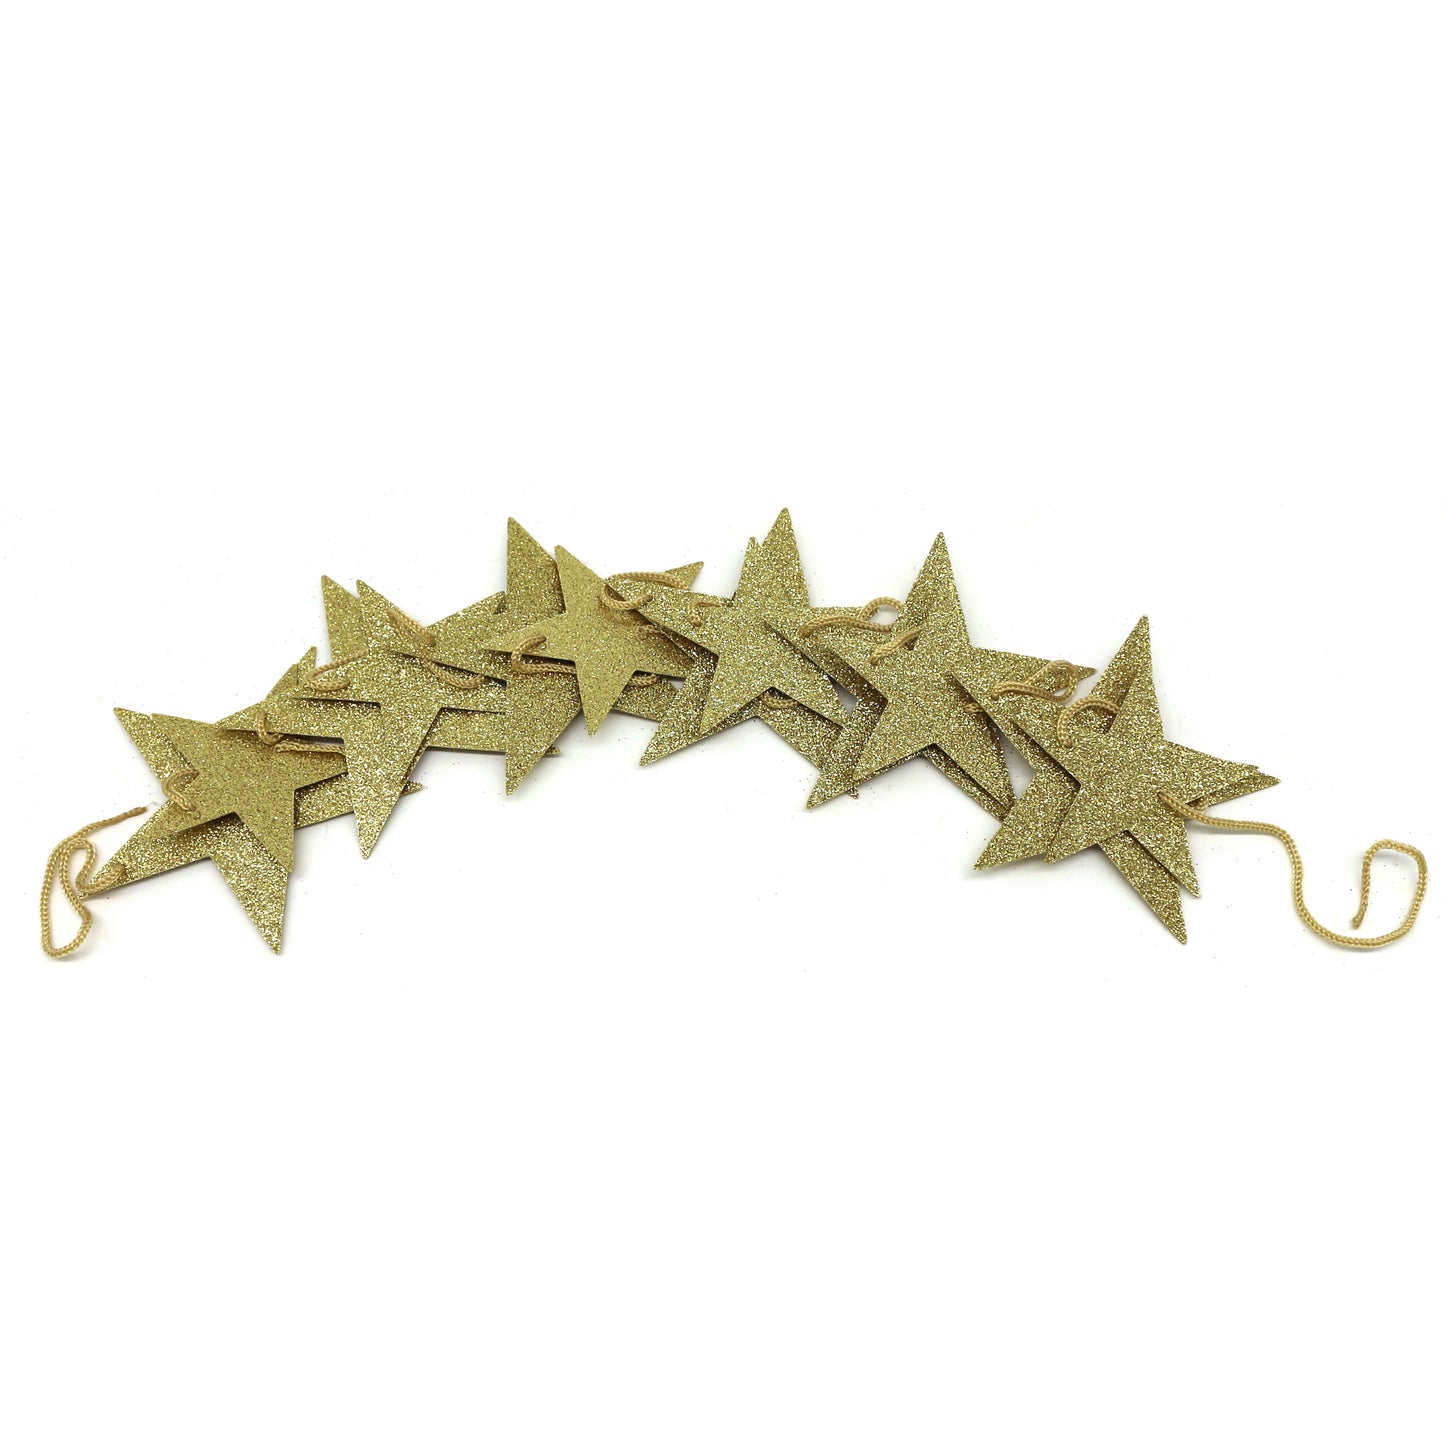 CVHOMEDECO. Twinkle Glittered Paper Star String Star Garland Unique Hanging Bunting Banner for Wedding Birthday Party Festival Home Background Decoration, 5.5 feet, Pack of 2 PCS (Golden)